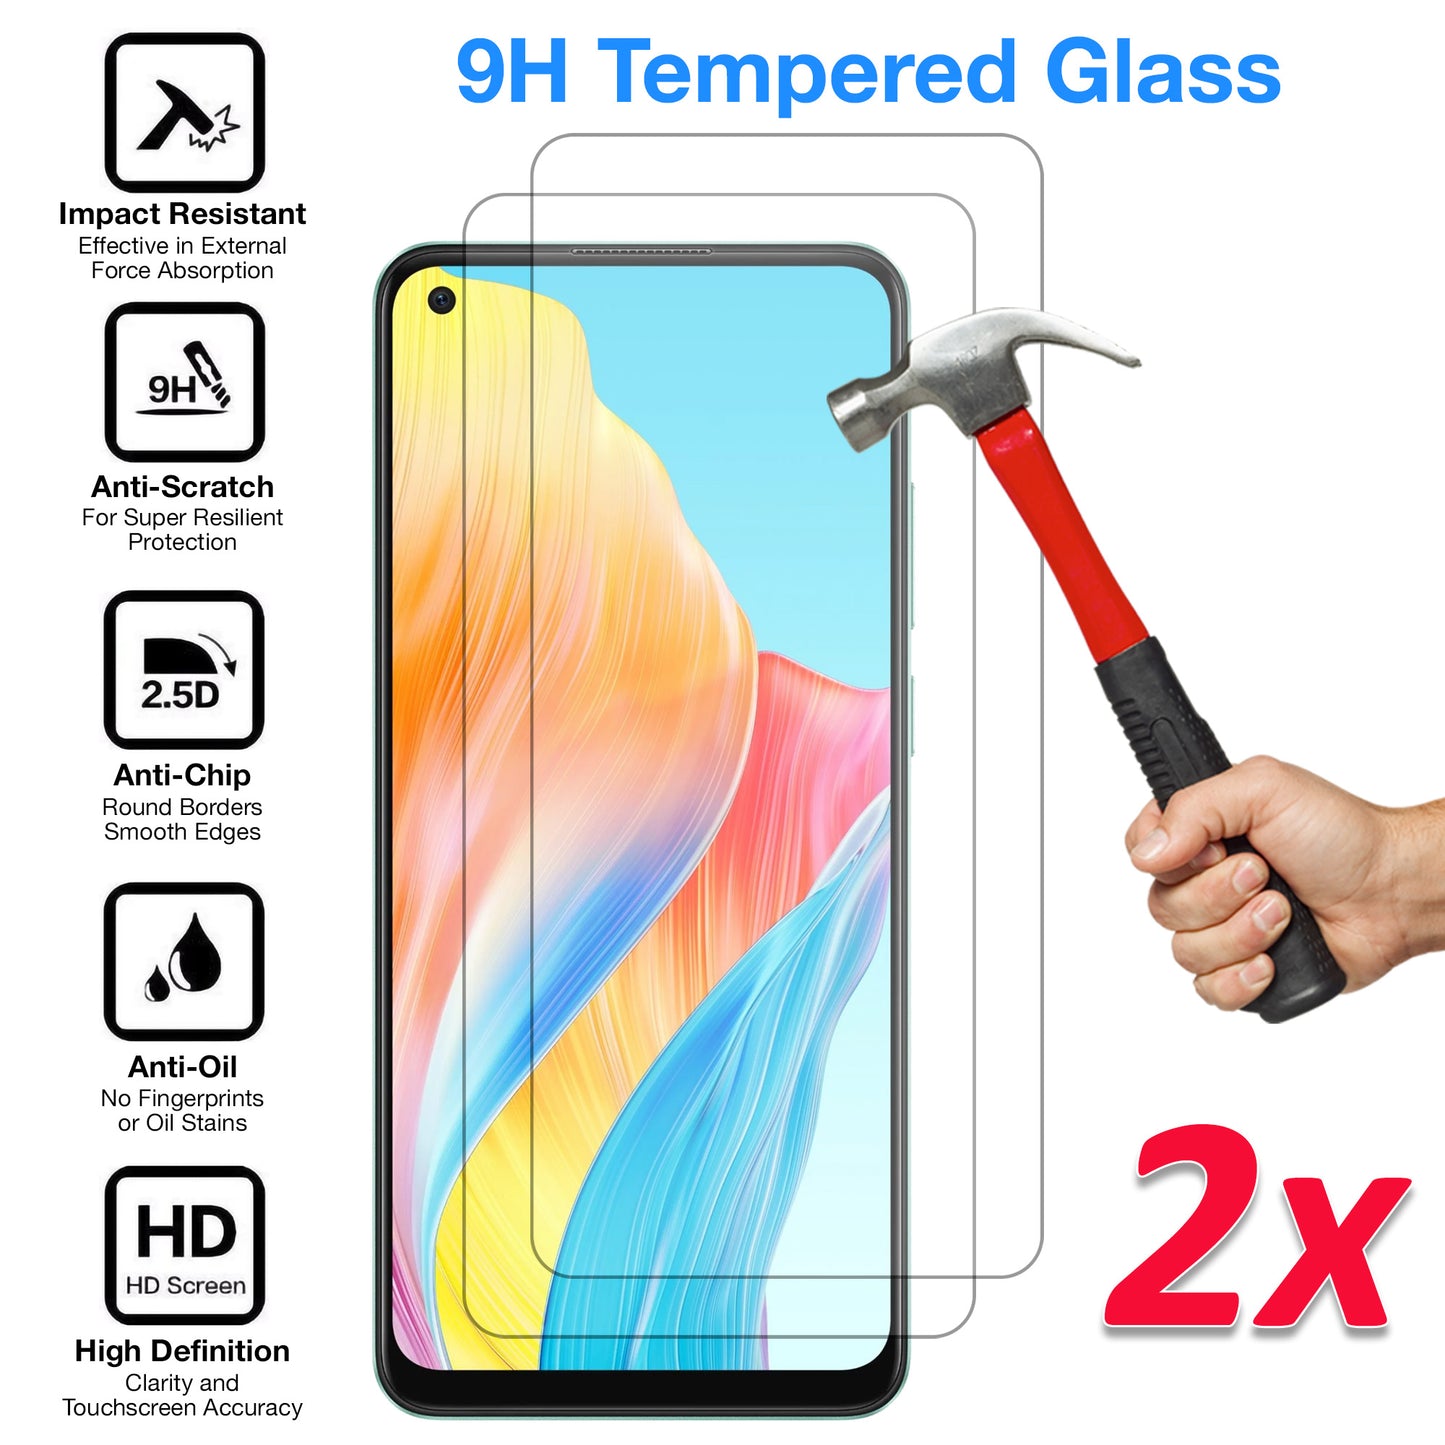 [2 Pack] MEZON Tempered Glass for OPPO A78 4G Crystal Clear Premium 9H HD Case Friendly Screen Protector (OPPO A78 4G, 9H)